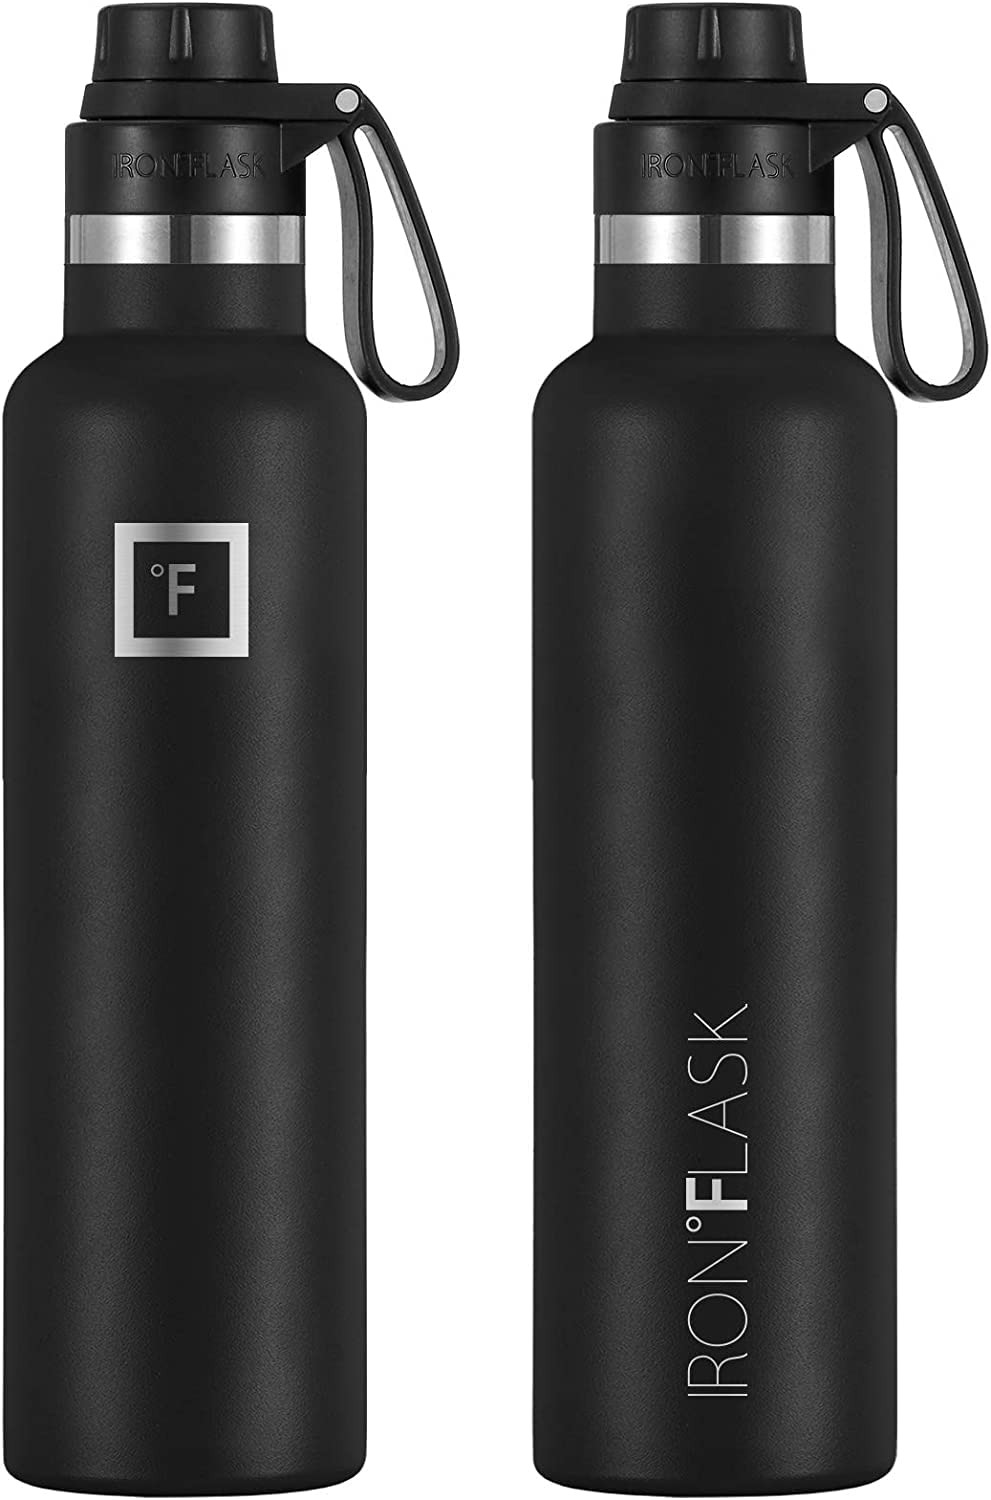 IRON °FLASK Sports Water Bottle - 24 Oz - 3 Lids (Narrow Spout Lid) Leak Proof, Durable Vacuum Insulated Stainless Steel - Hot & Cold Double Walled Insulated Thermos - Mothers Day Gifts